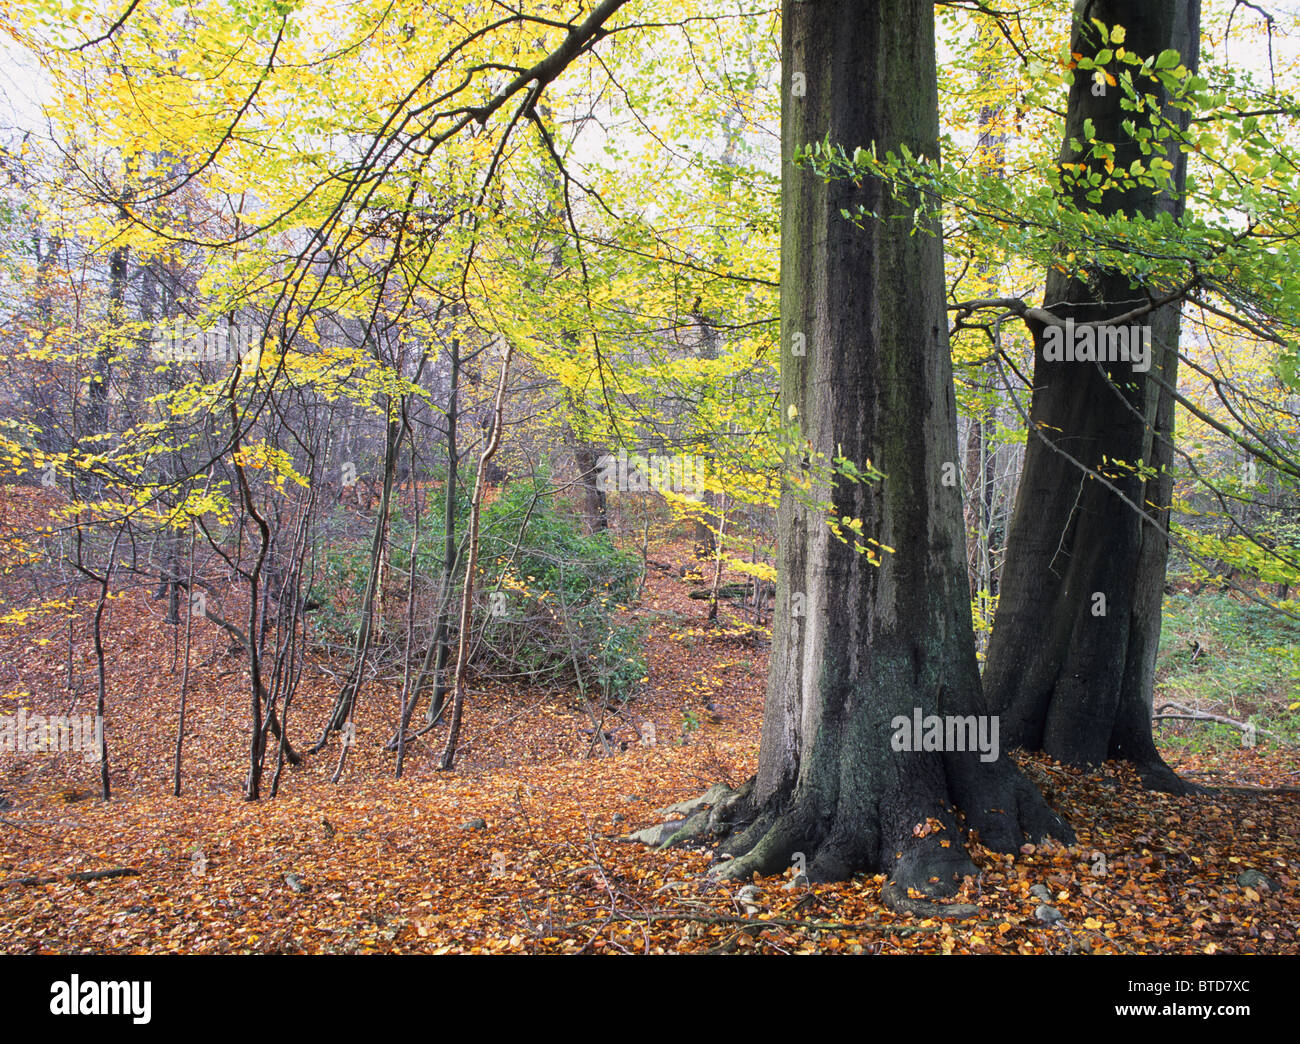 Autumn leaves in Epping forest, Greater London, England Stock Photo